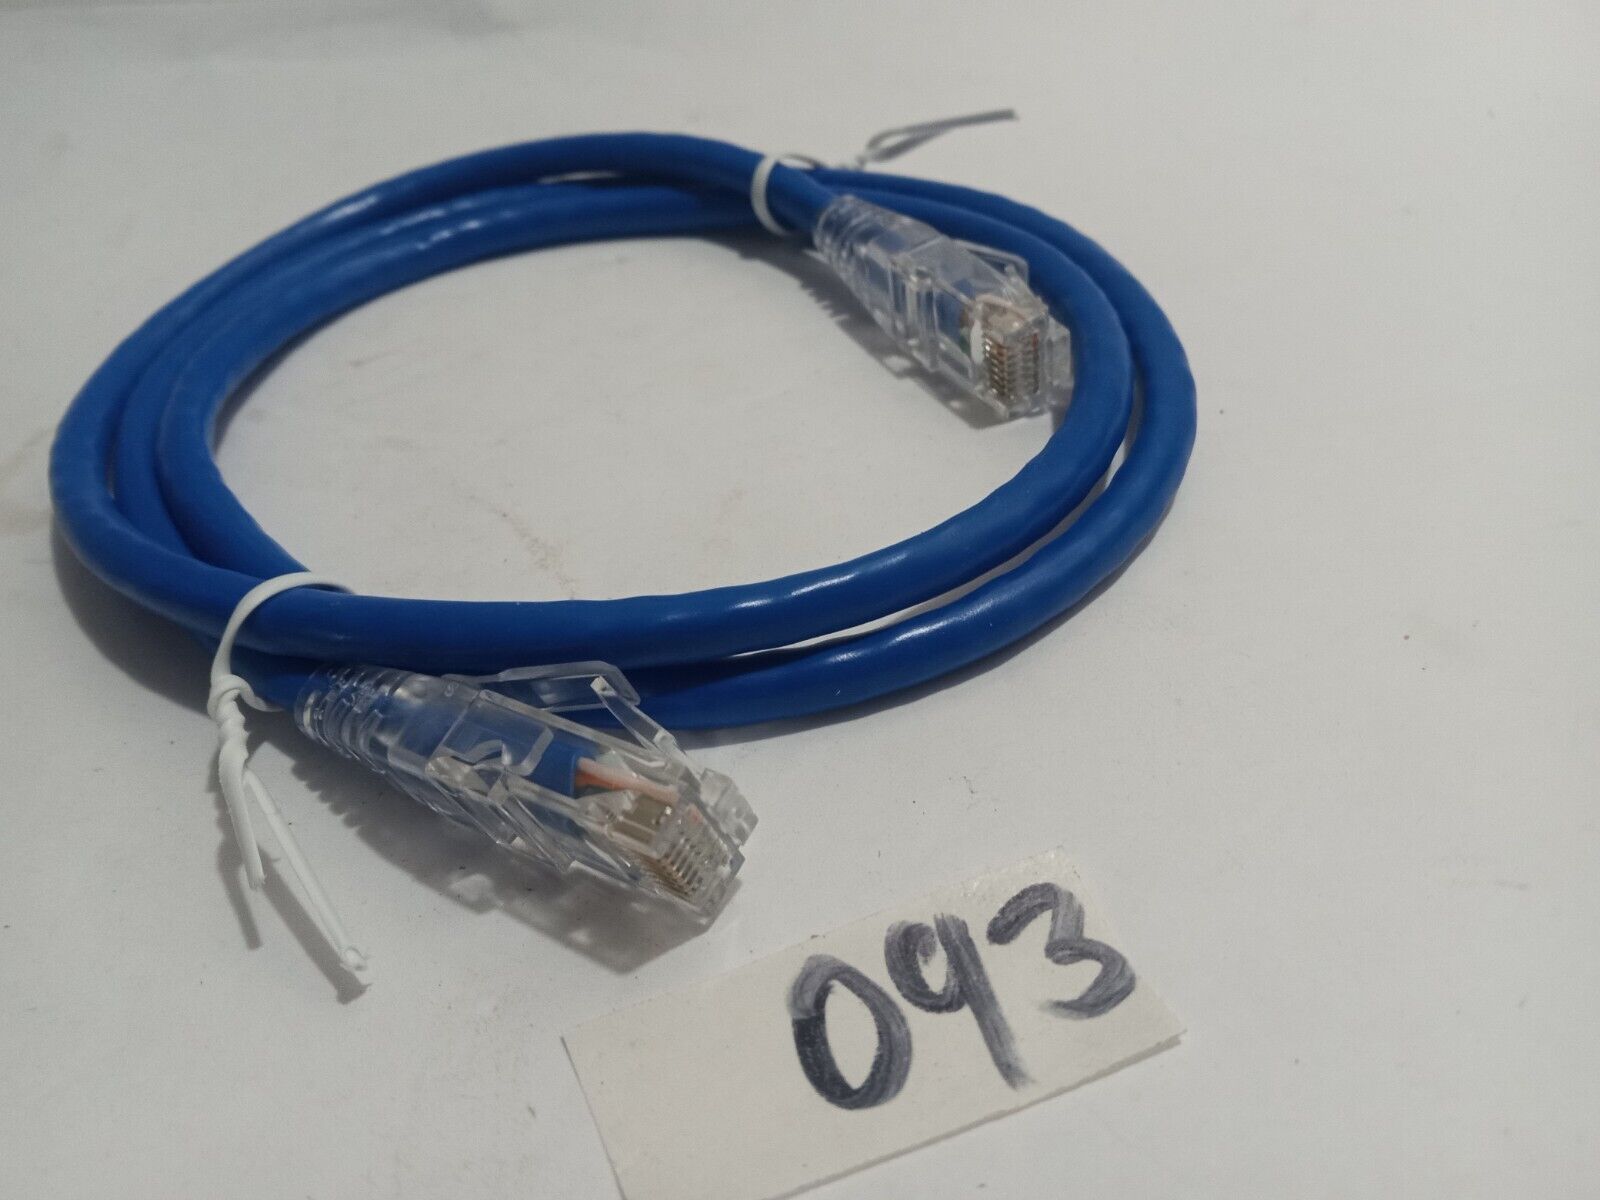 ICC ICPCST03BL PATCH CORD CAT 6 CLEAR BOOT 3FT BLUE